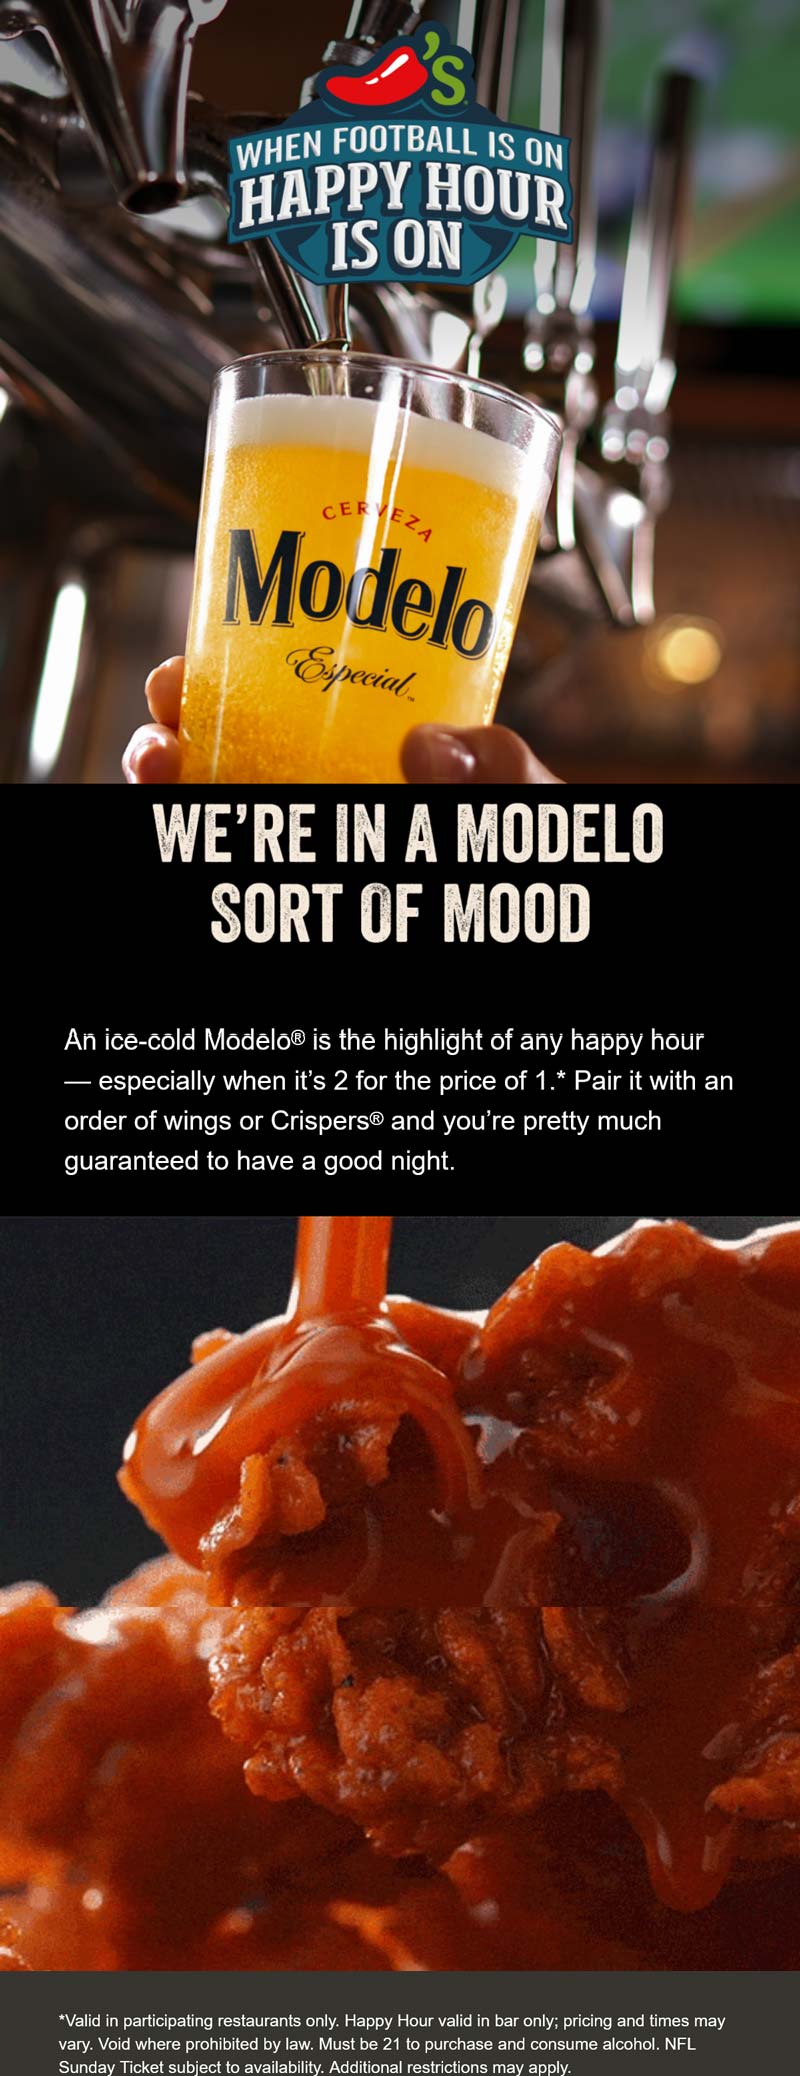 Chilis restaurants Coupon  Second Modelo beer free game night at Chilis restaurants #chilis 